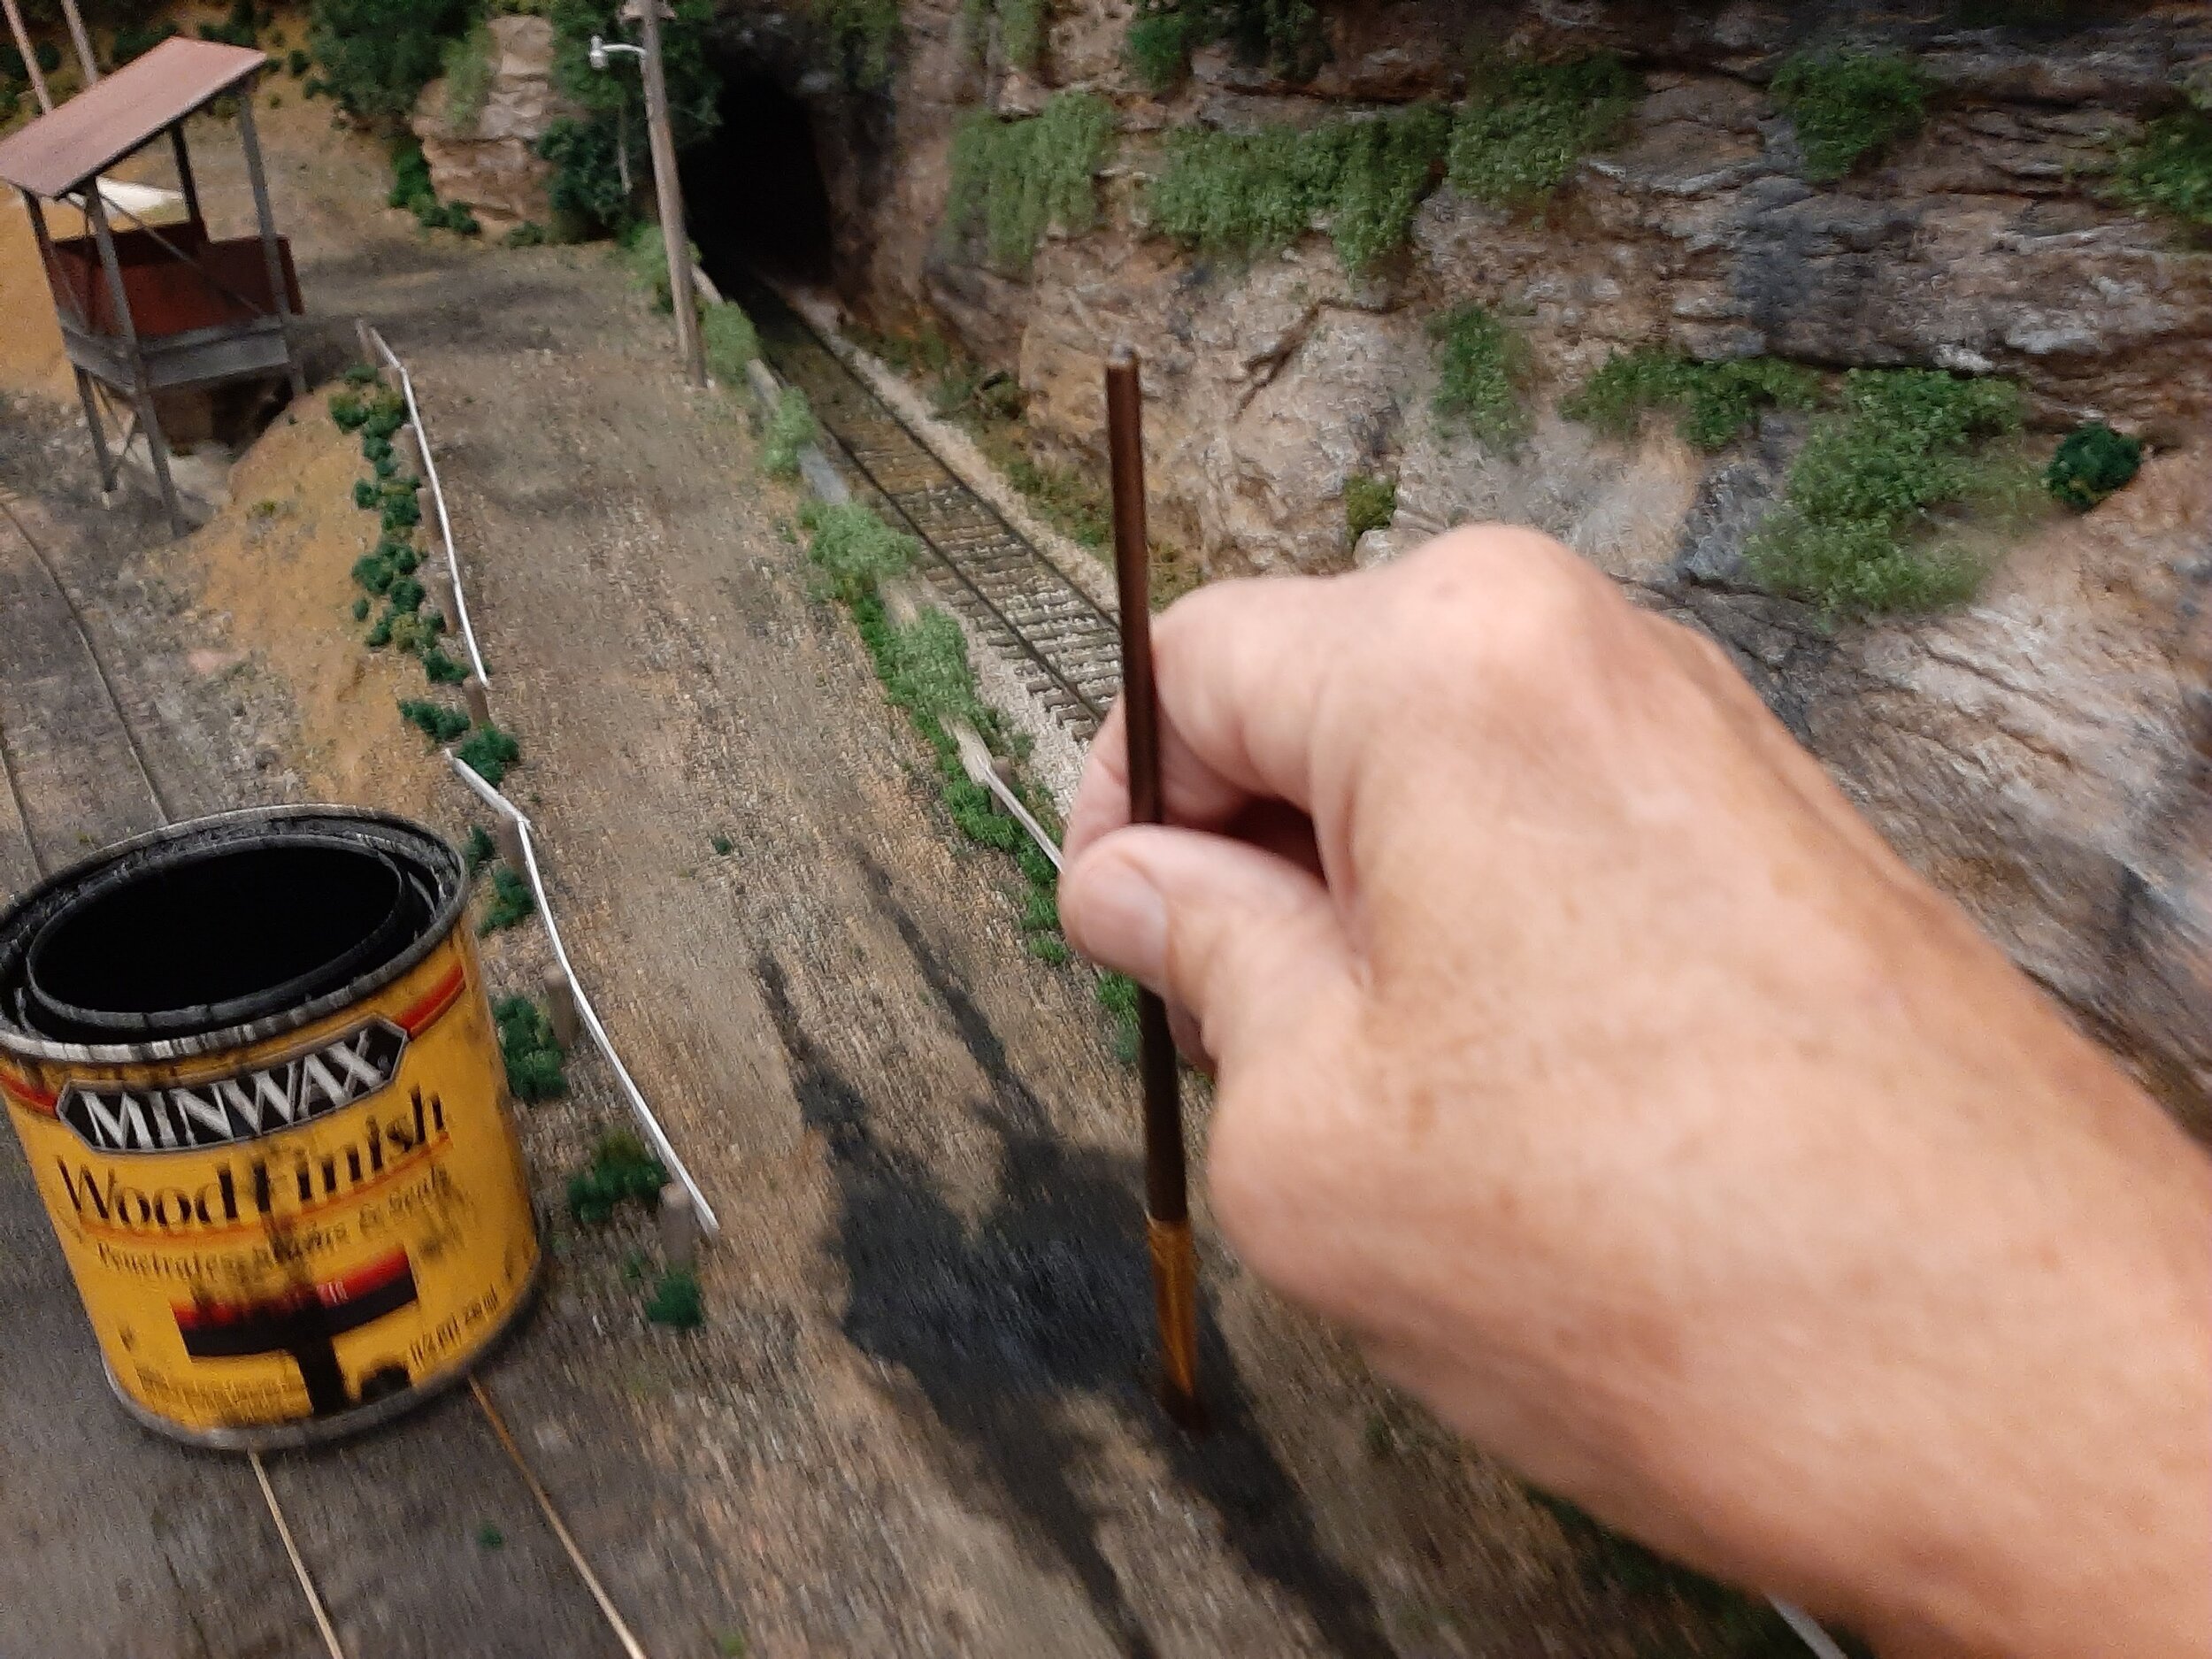  Minwax Ebony stain is applied to the puddle and “wet track” areas.(During earlier scene planning I had removed/sanded the “Bowl” for the puddle into the Micore.). This also works on rock faces to simulate weeping water. 